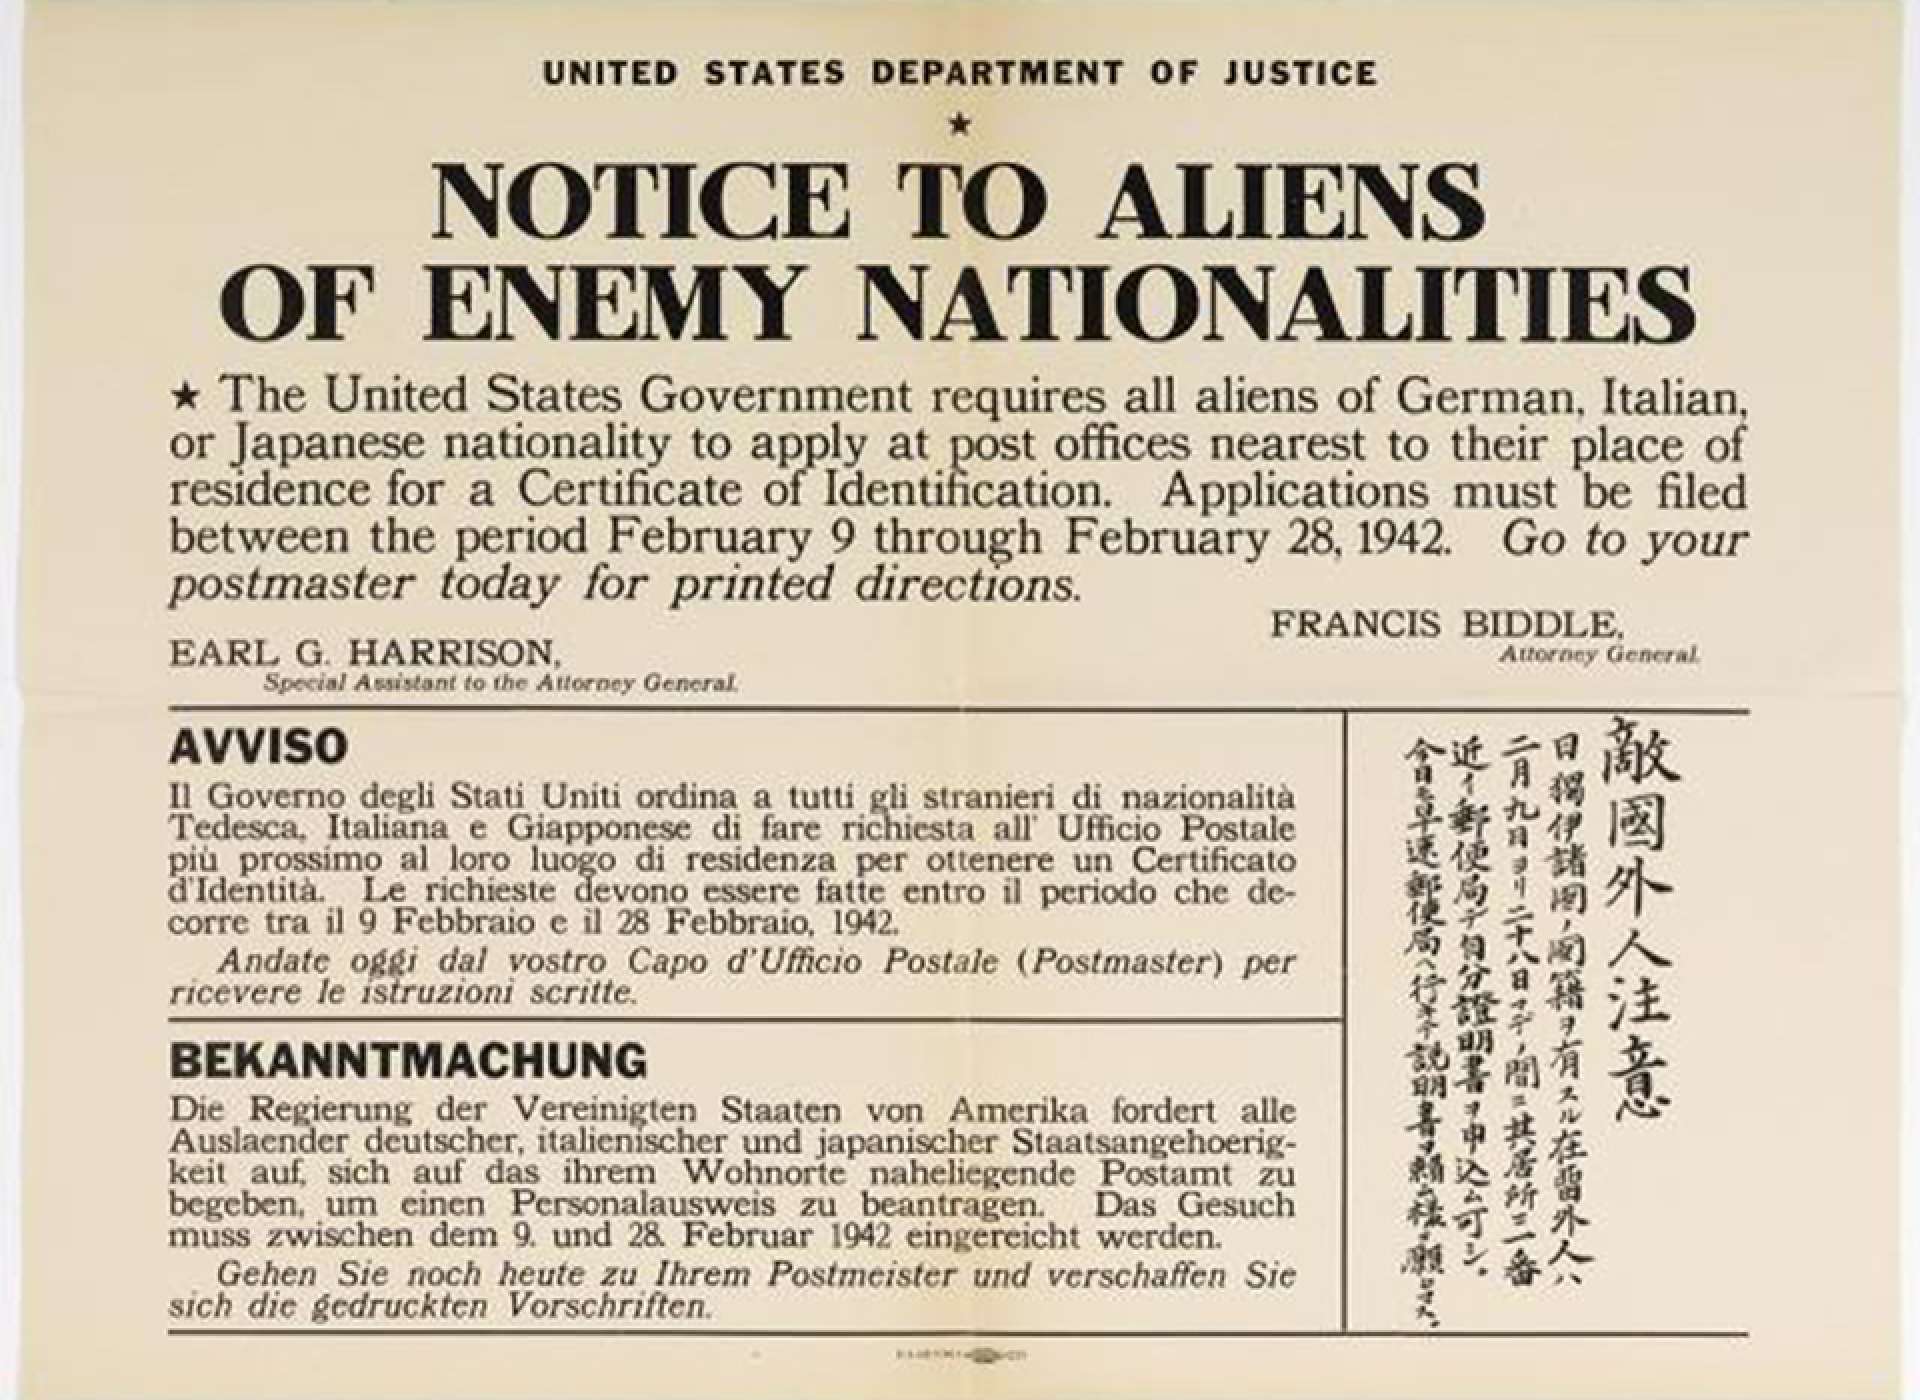 case study enemy aliens and the home front